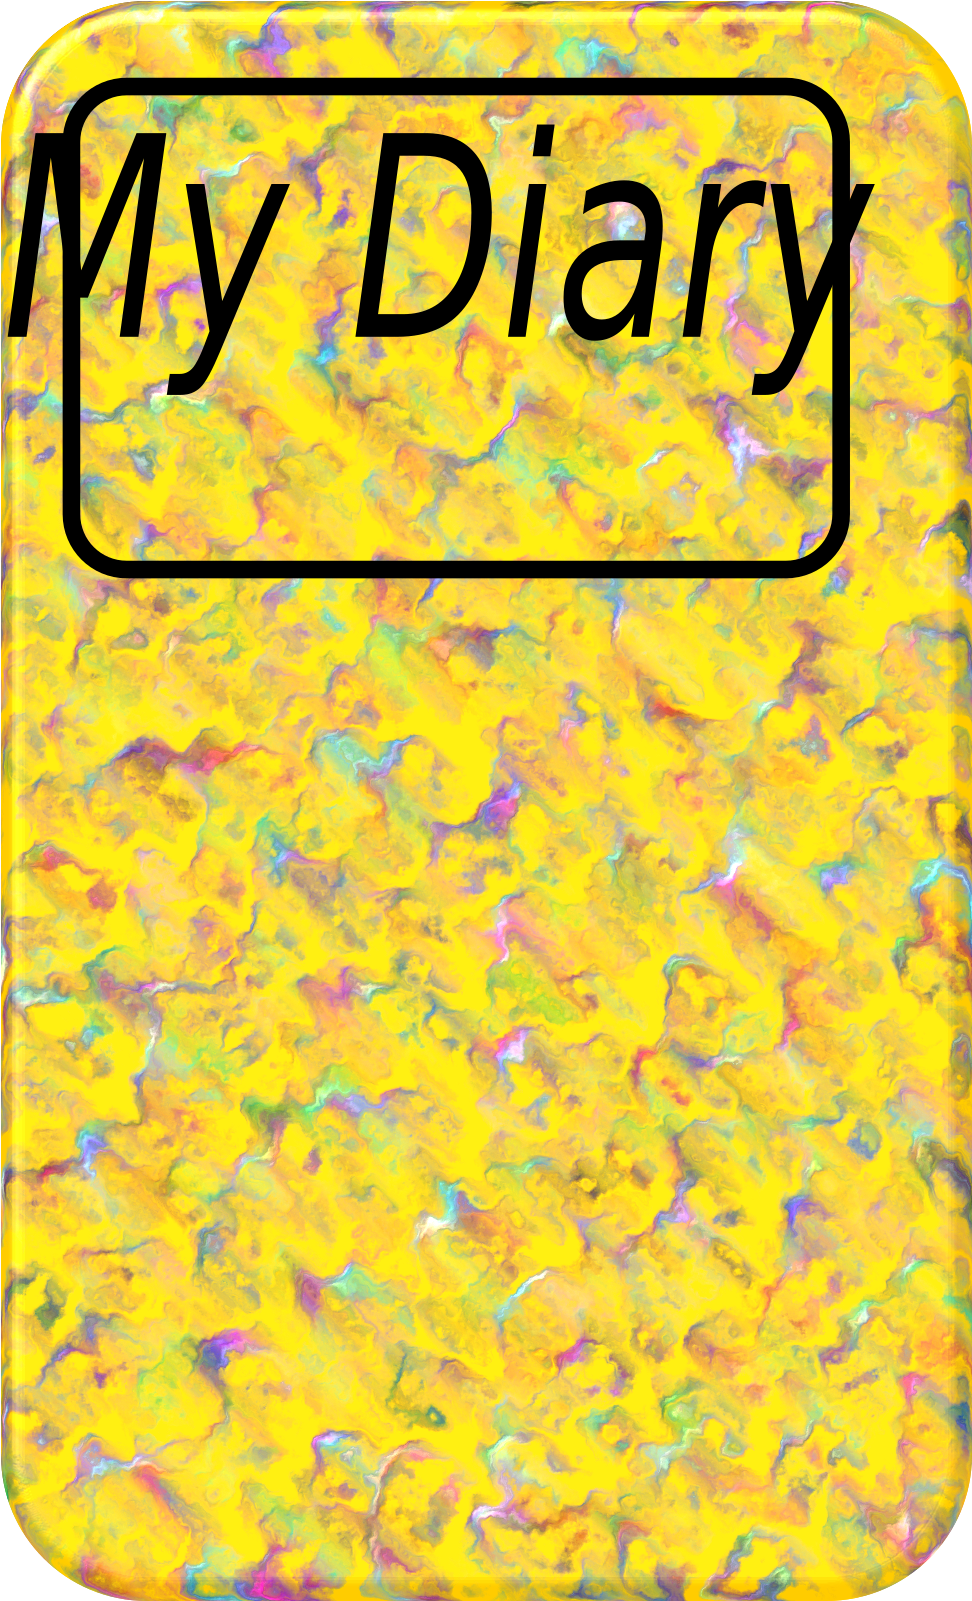 A Yellow And Black Cover With A Black Rectangle And Black Text